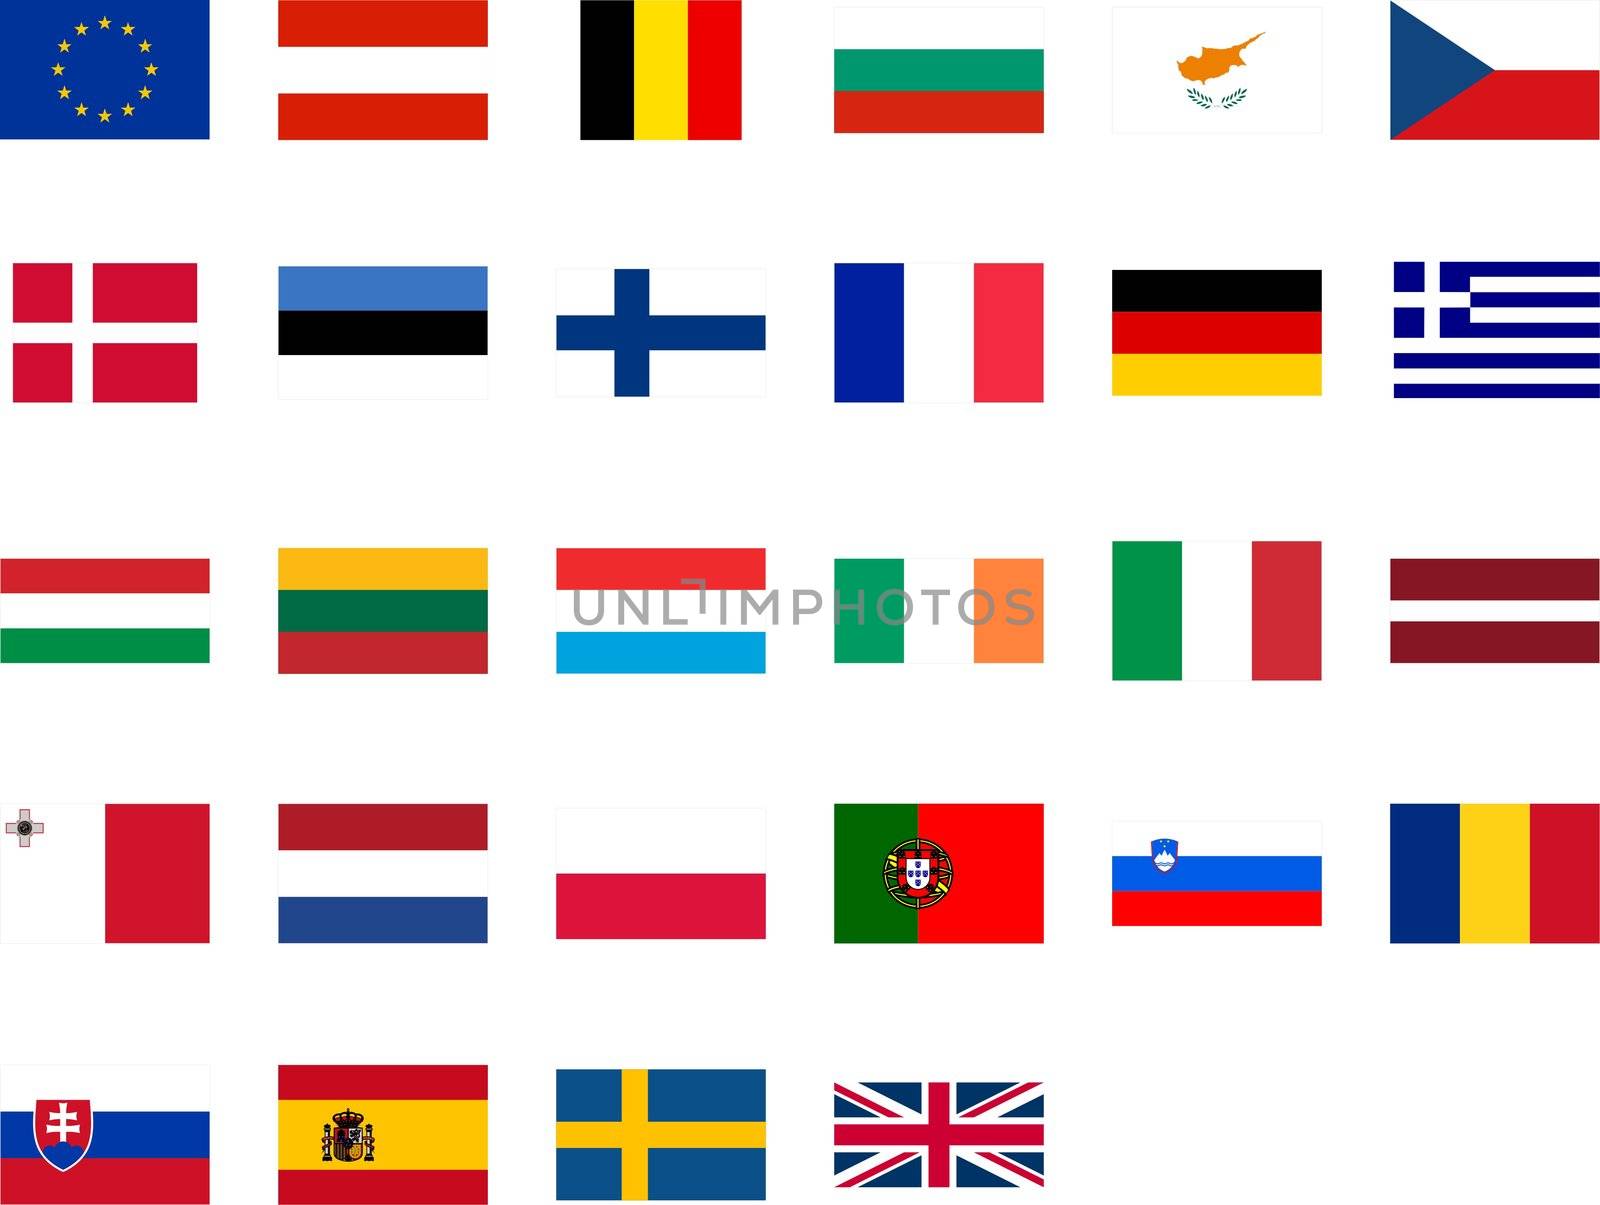 Flags of the European Union member countries